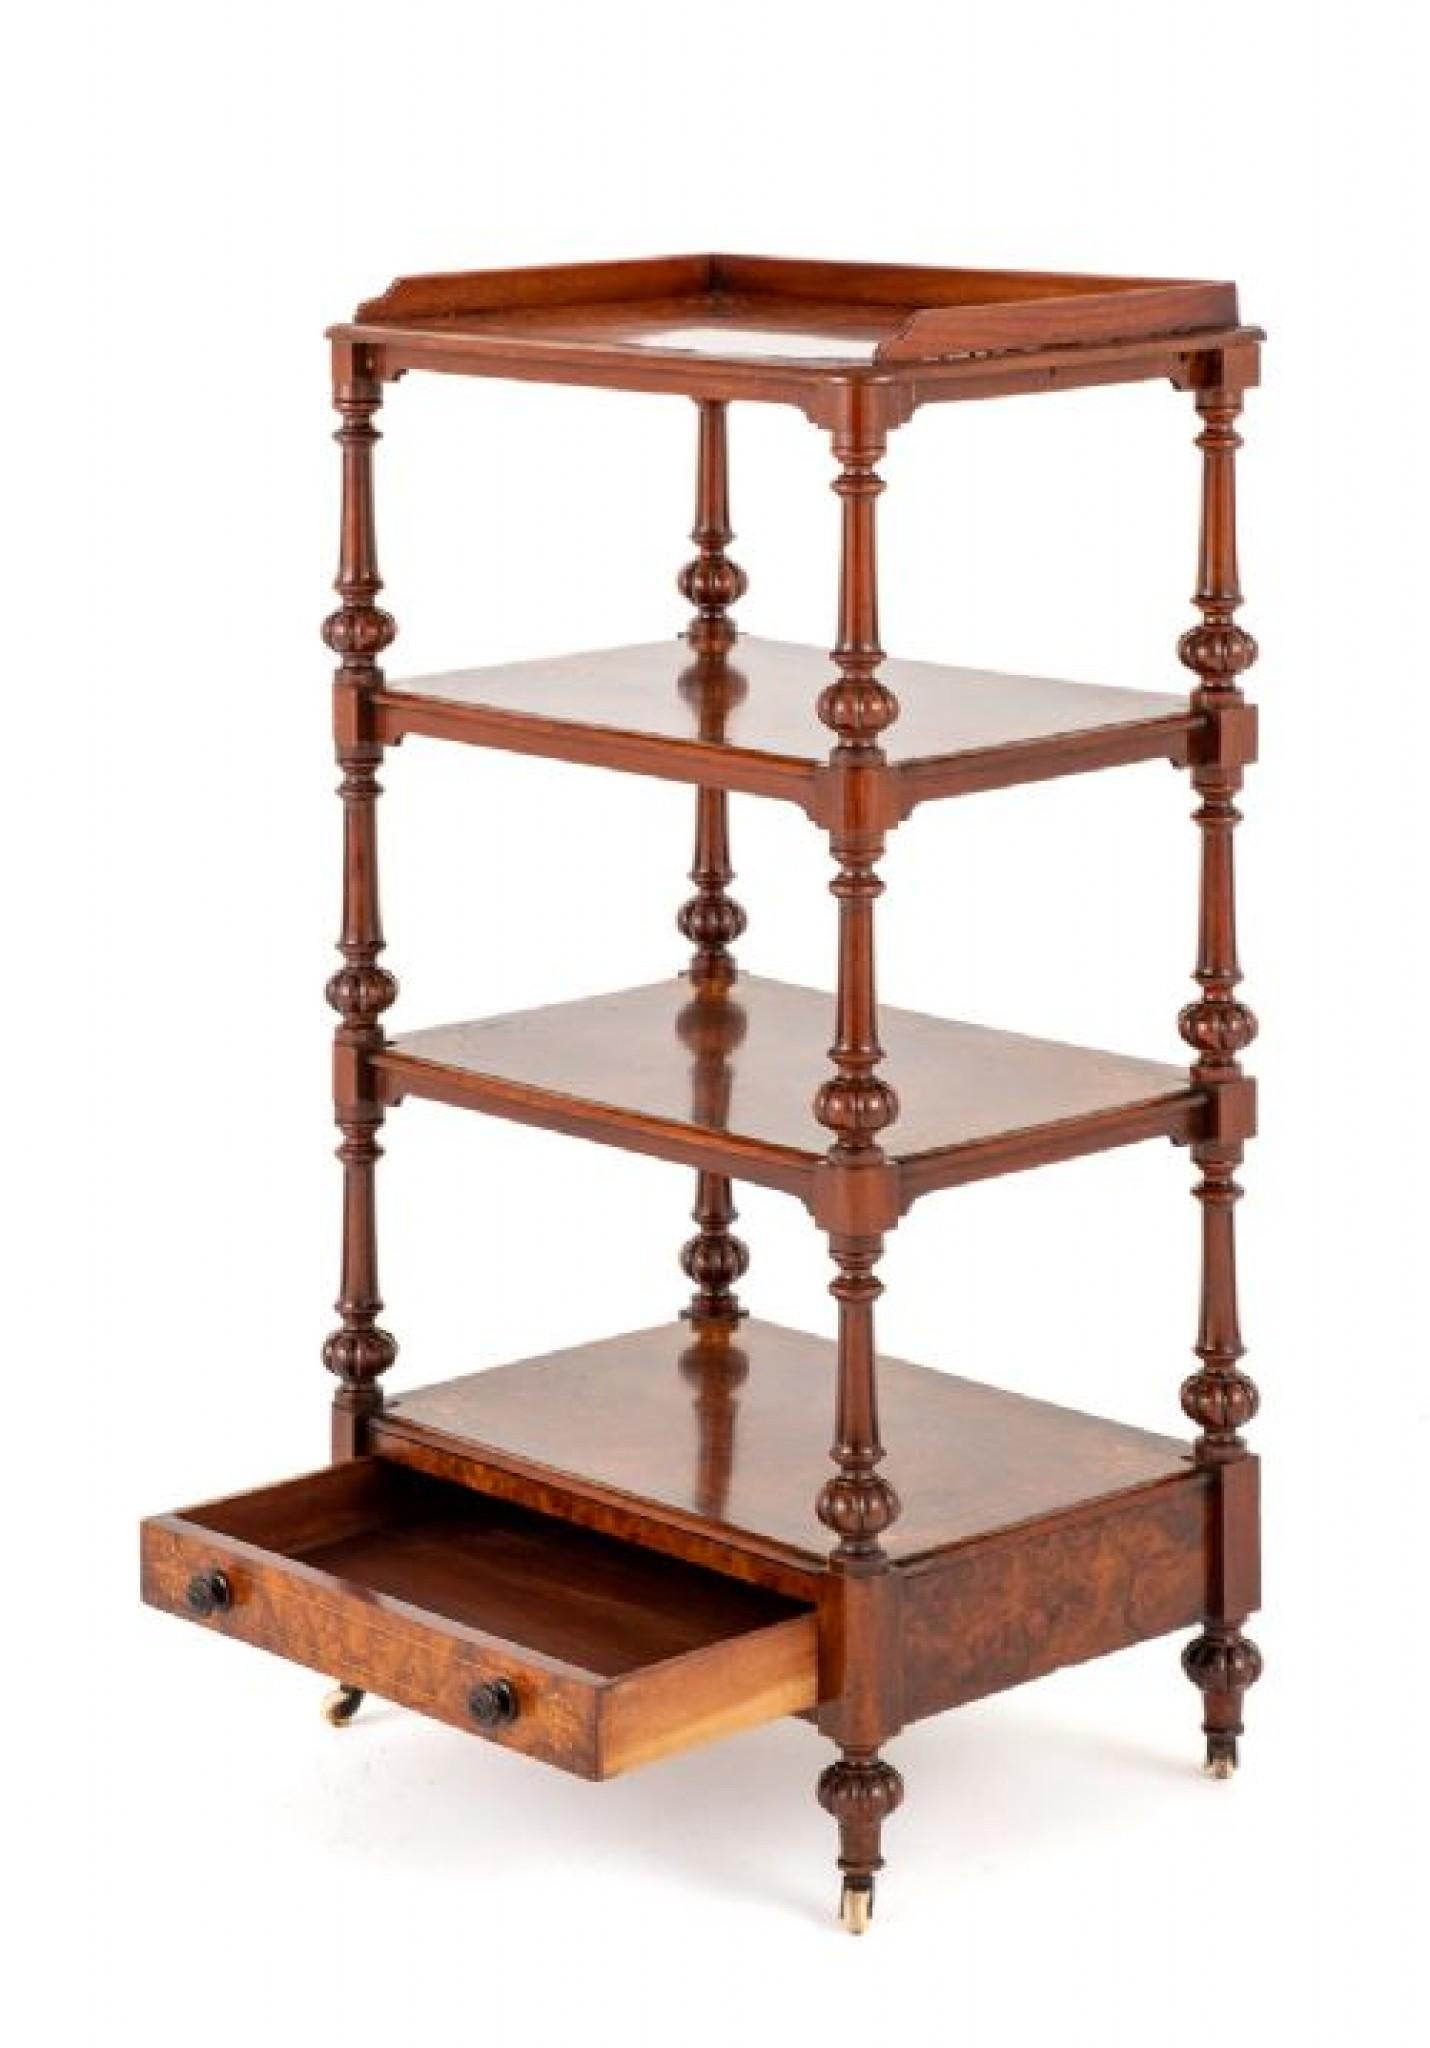 This high-quality burr walnut whatnot having turned and fluted uprights, turned and fluted feet with original castors.
circa 1860
The Mahogany Lined Drawer Having Turned Knobs.
The Whatnot Features Marquetry Inlays and Boxwood Lines.
Presented